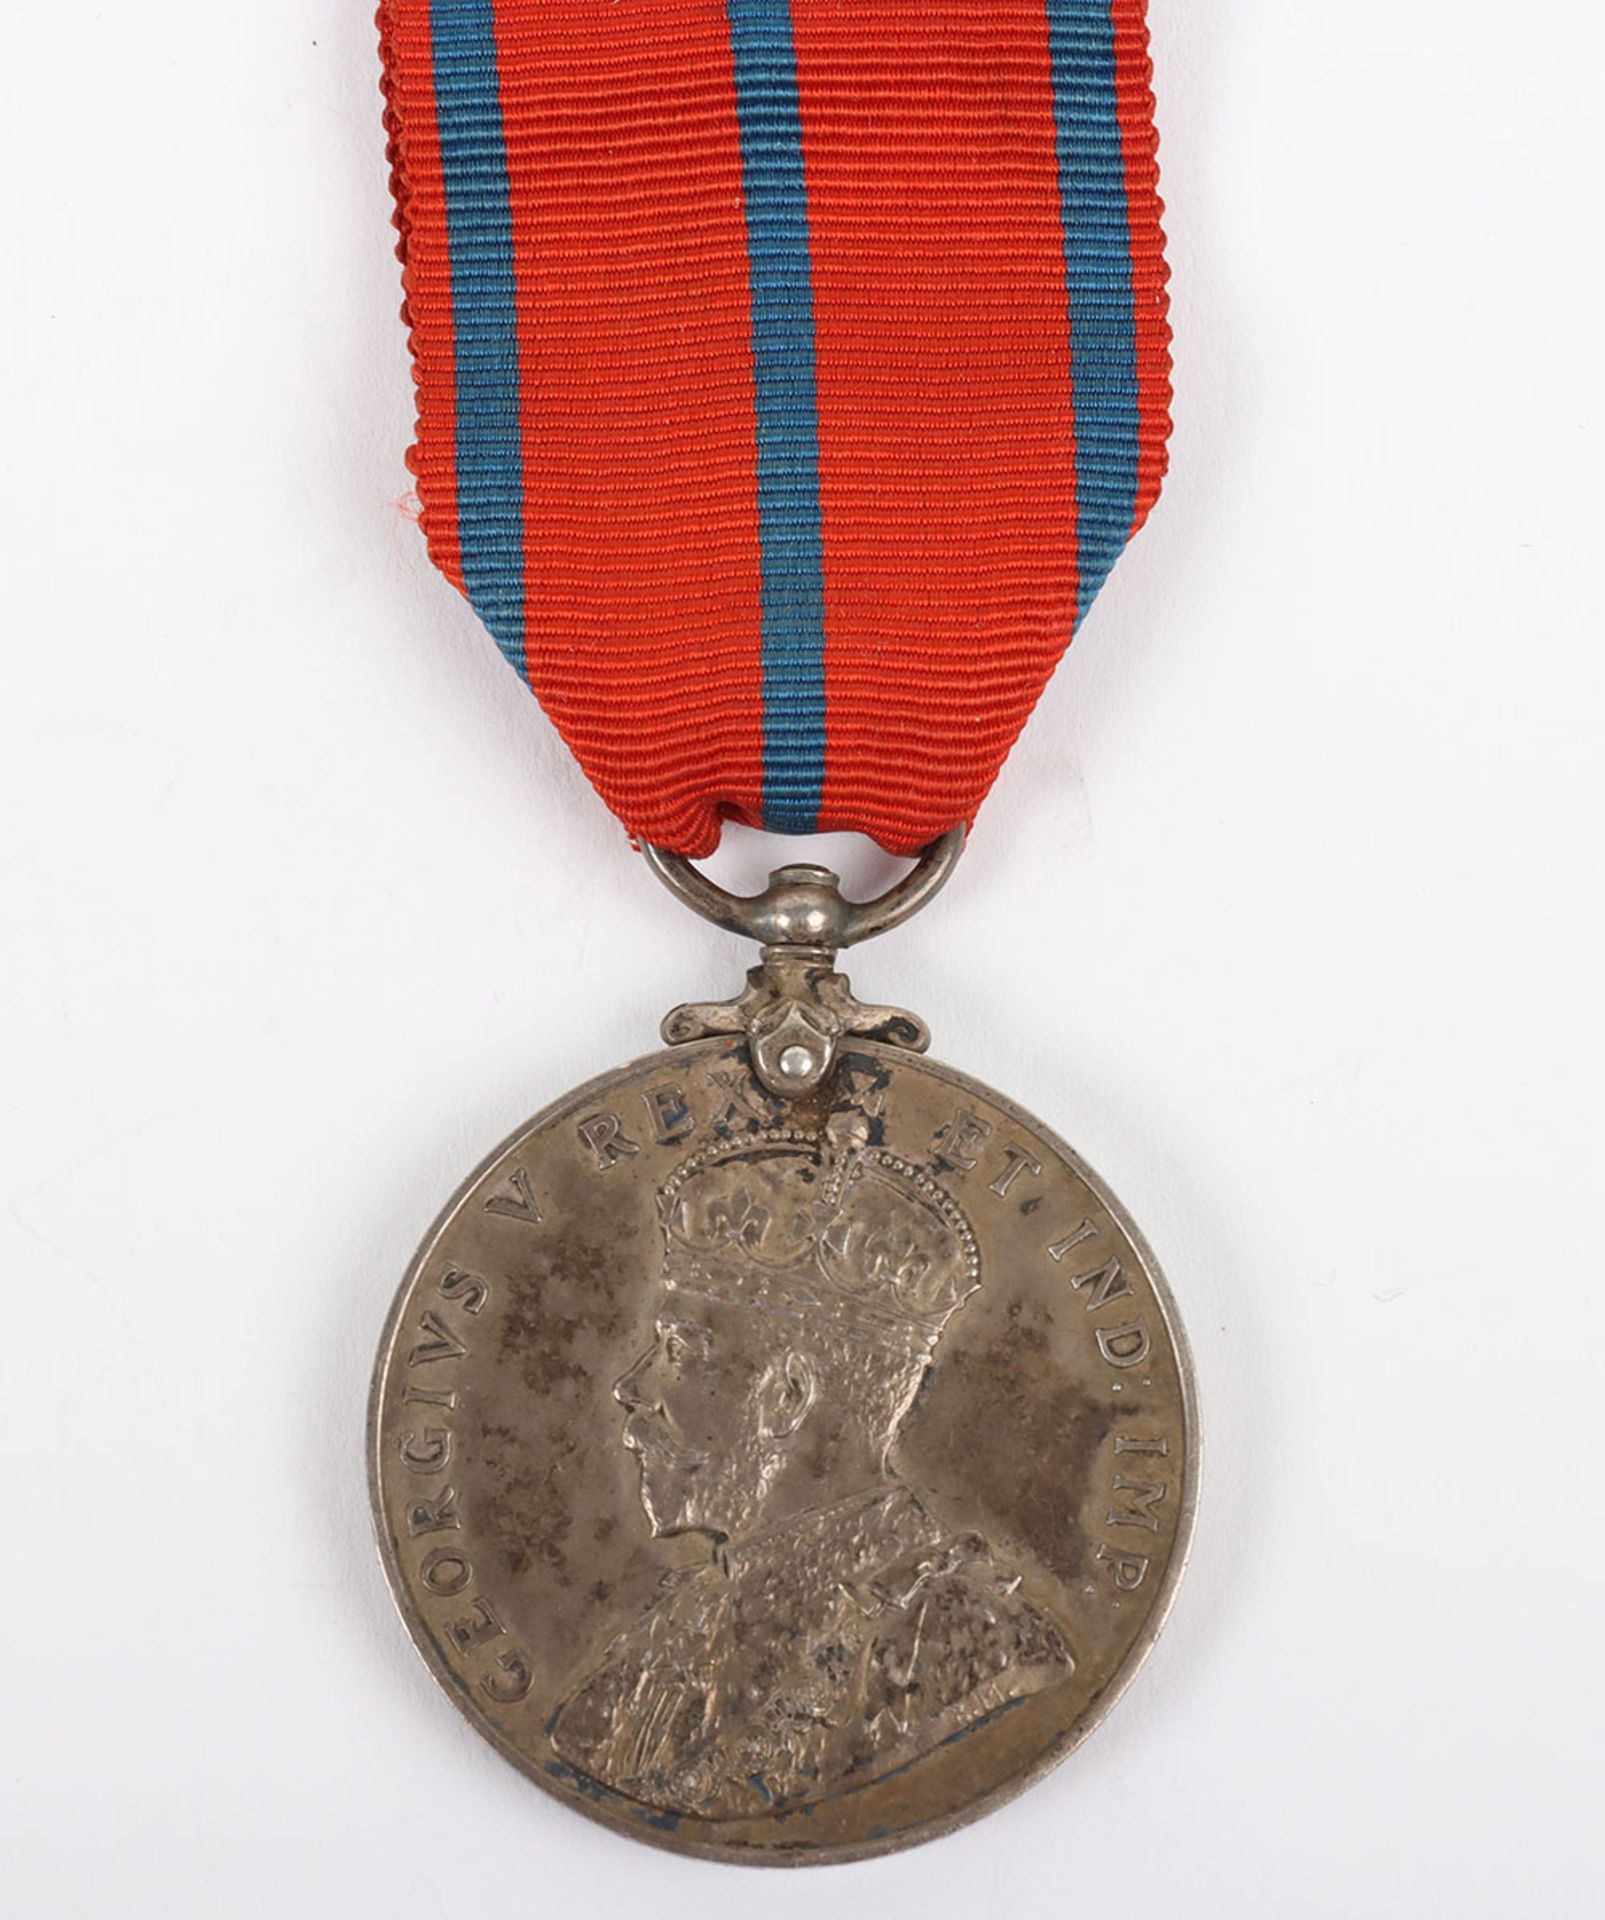 An unusual 1911 Coronation medal to a Storeman in the St Johns Ambulance Brigade